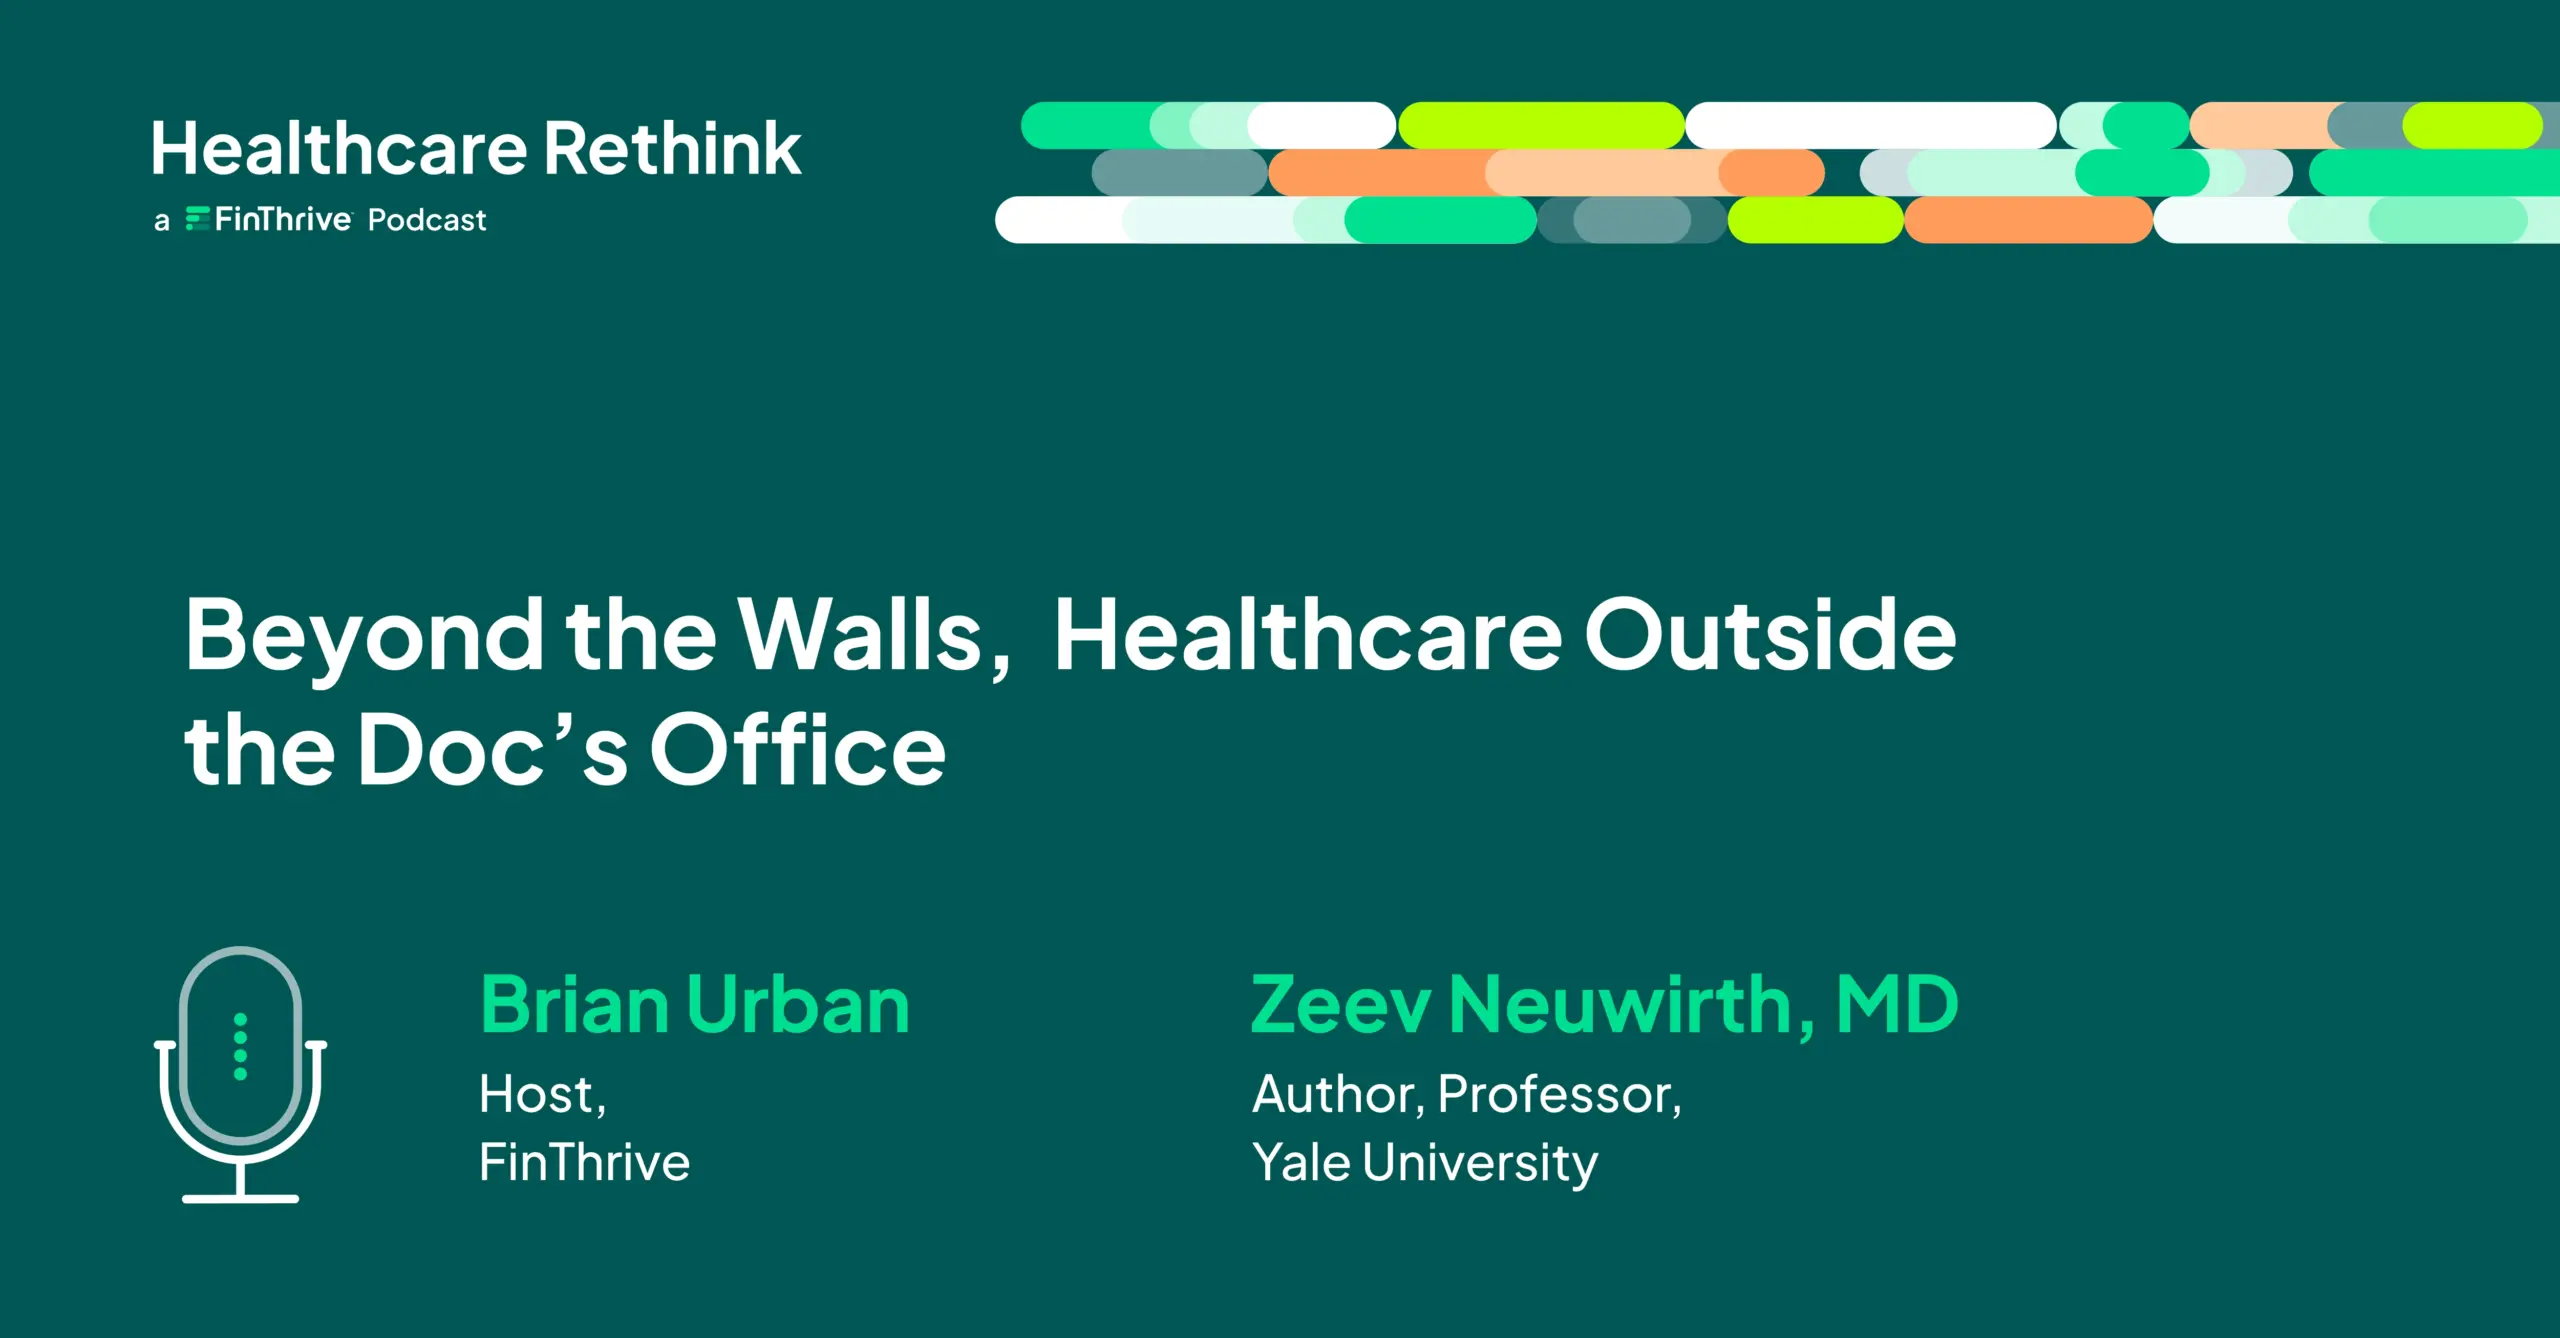 Beyond the Walls: Healthcare Outside the Doc’s Office